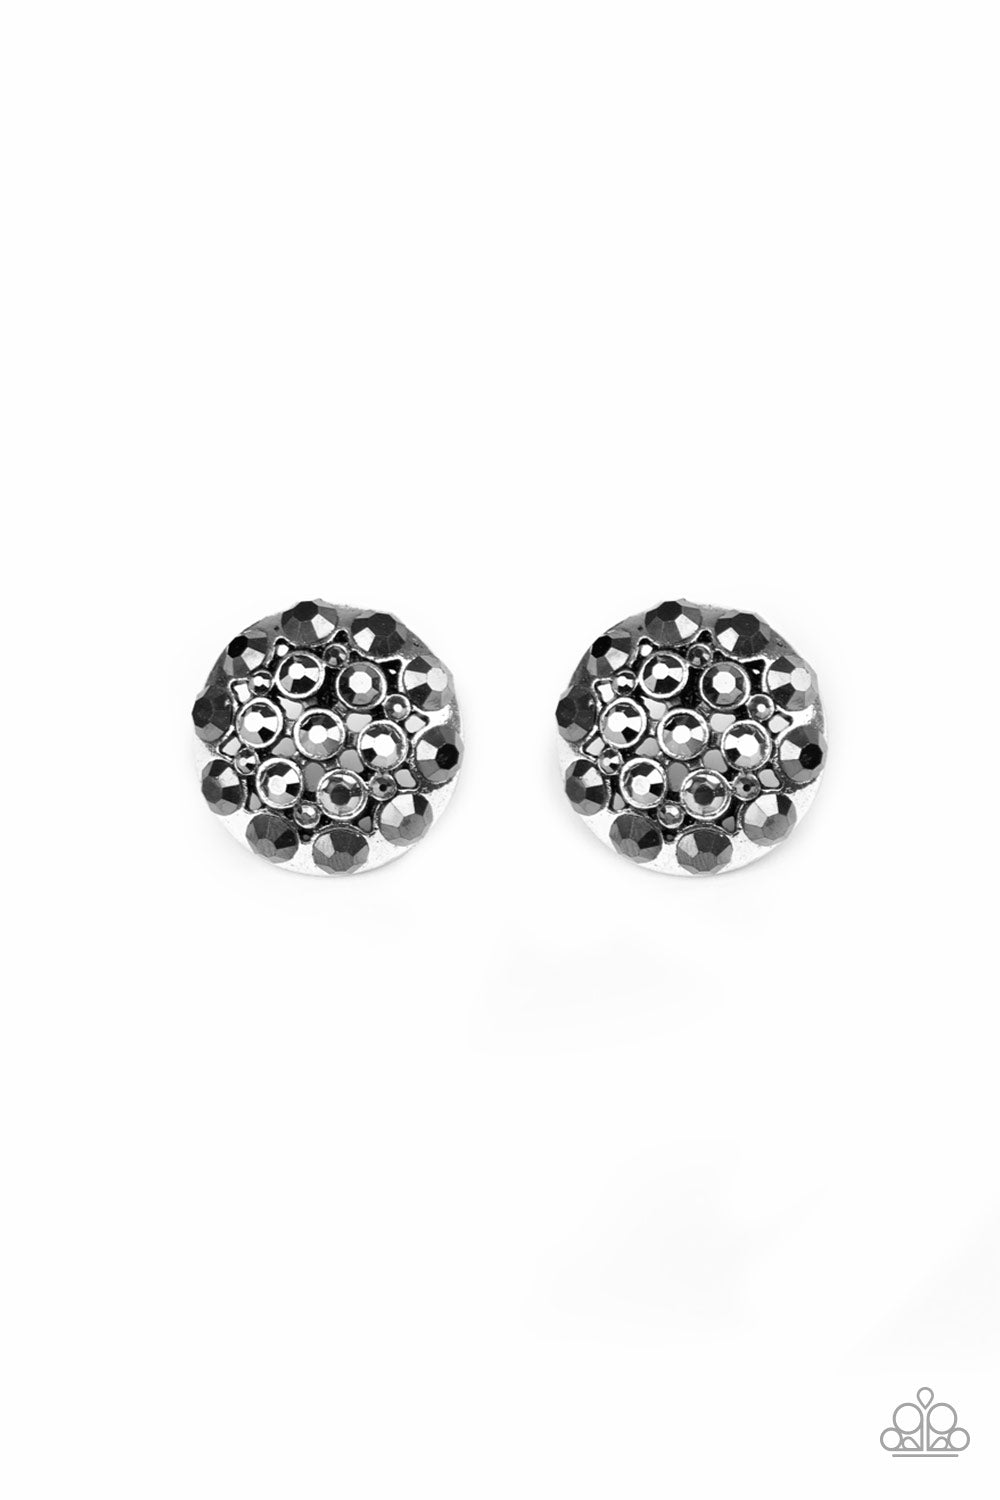 Hollywood Drama Paparazzi Accessories Earrings